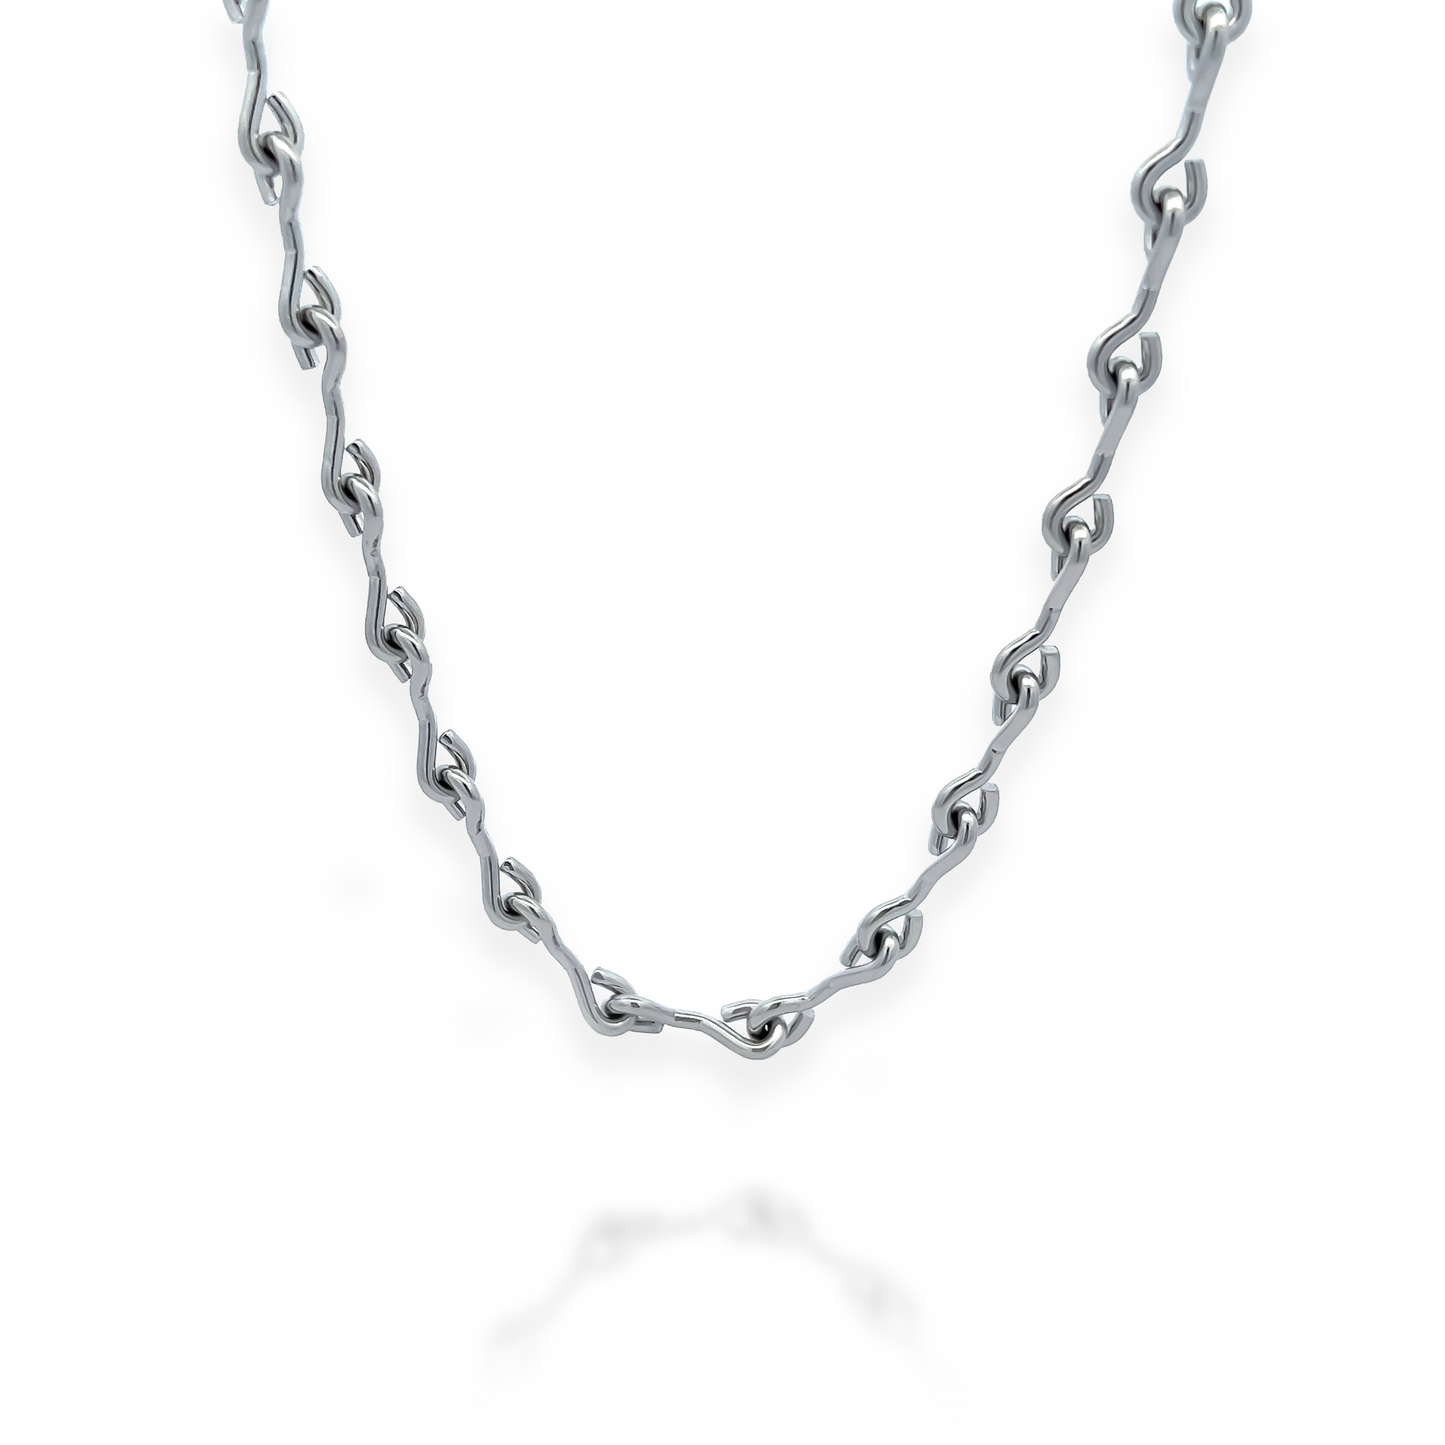 Tess Necklace in Silver